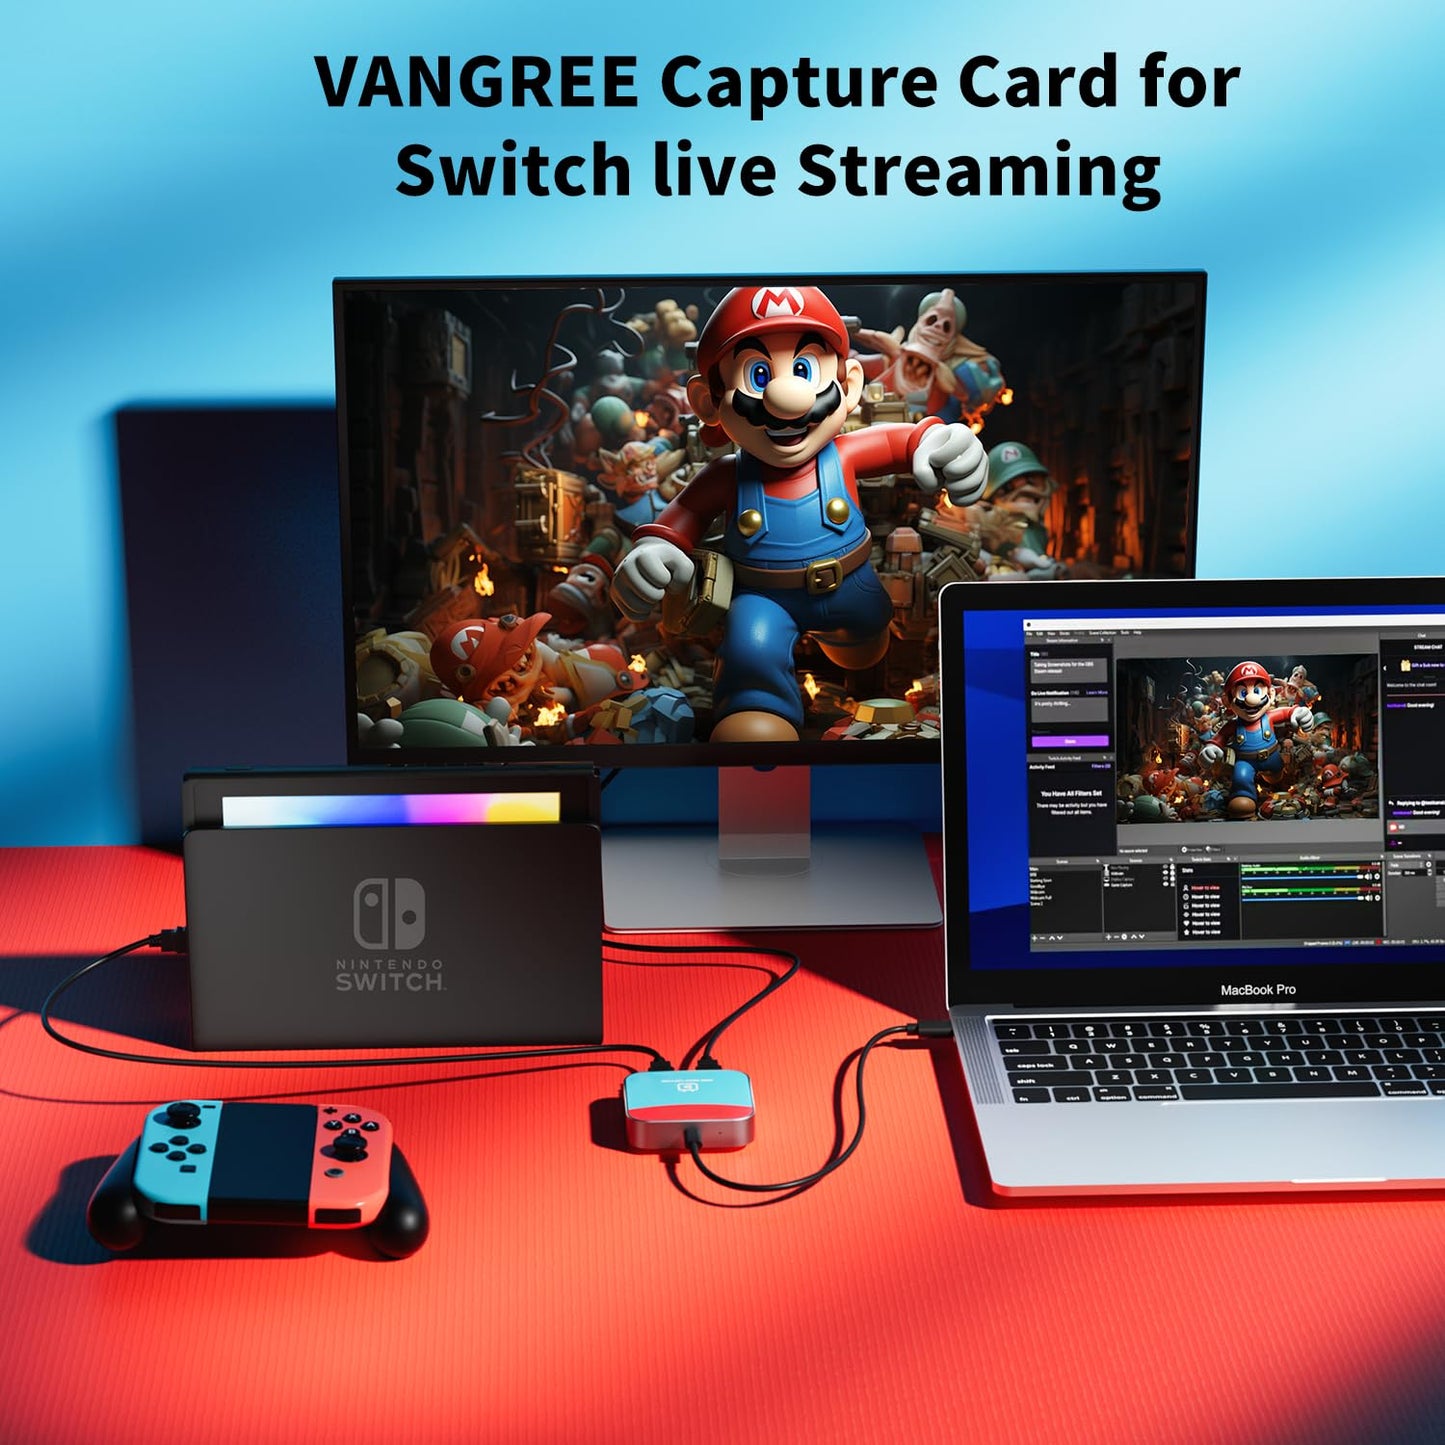 VANGREE Capture Card for Nintendo Switch, 4K Audio Video Capture Card, USB C 3.0 1080P 60FPS HDMI Recorder for Gaming/Live Streaming/Video Conference, Works for Nintendo Switch/PS5/Xbox/OBS/Camera/PC